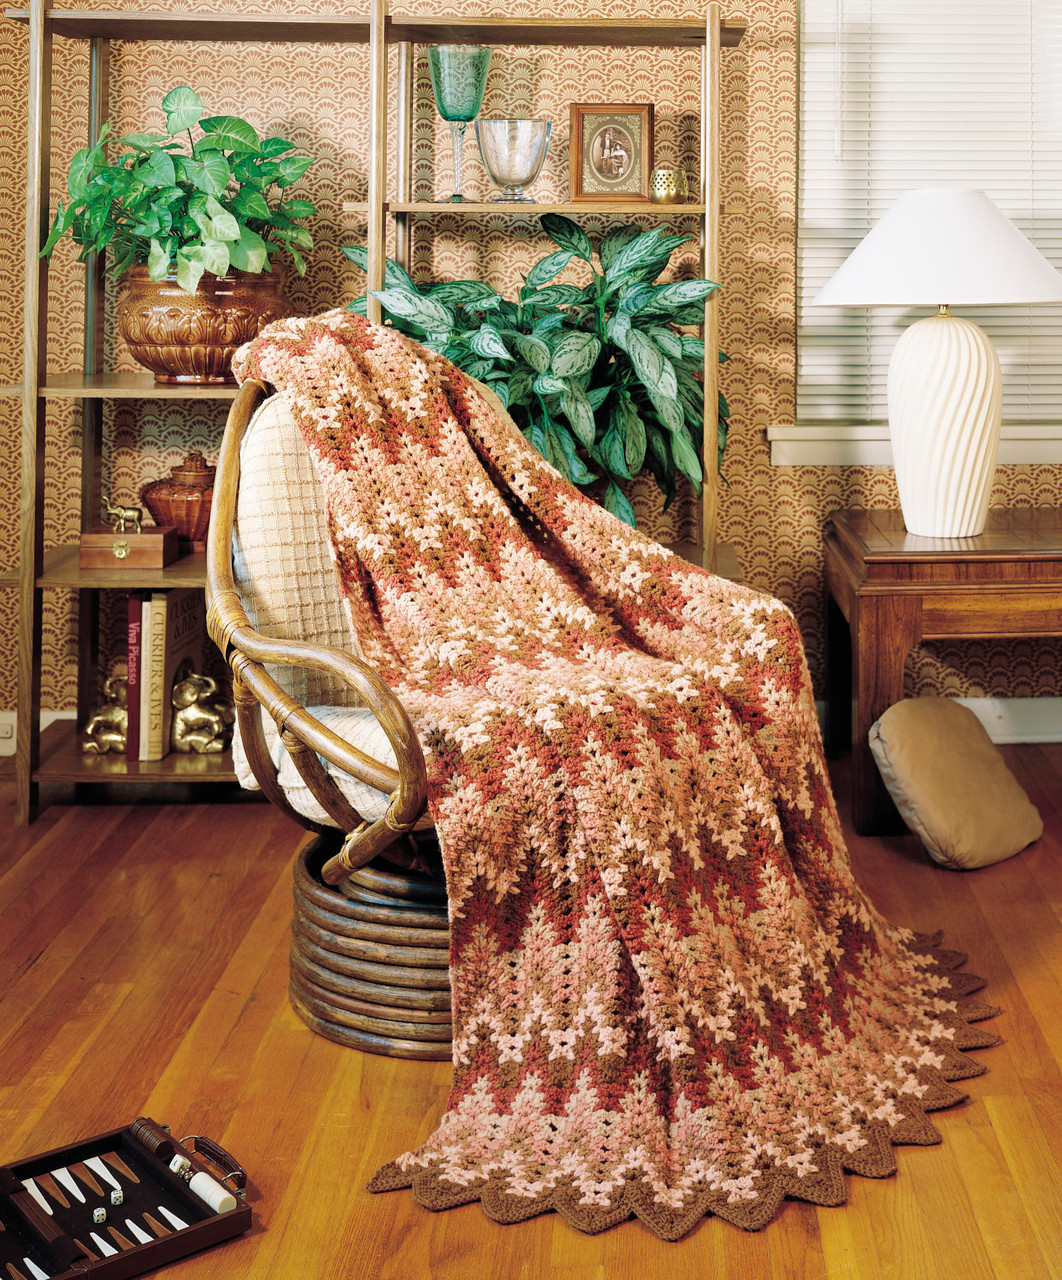 Crochet Pattern Book ~ LACY AFGHANS ~ 8 Designs